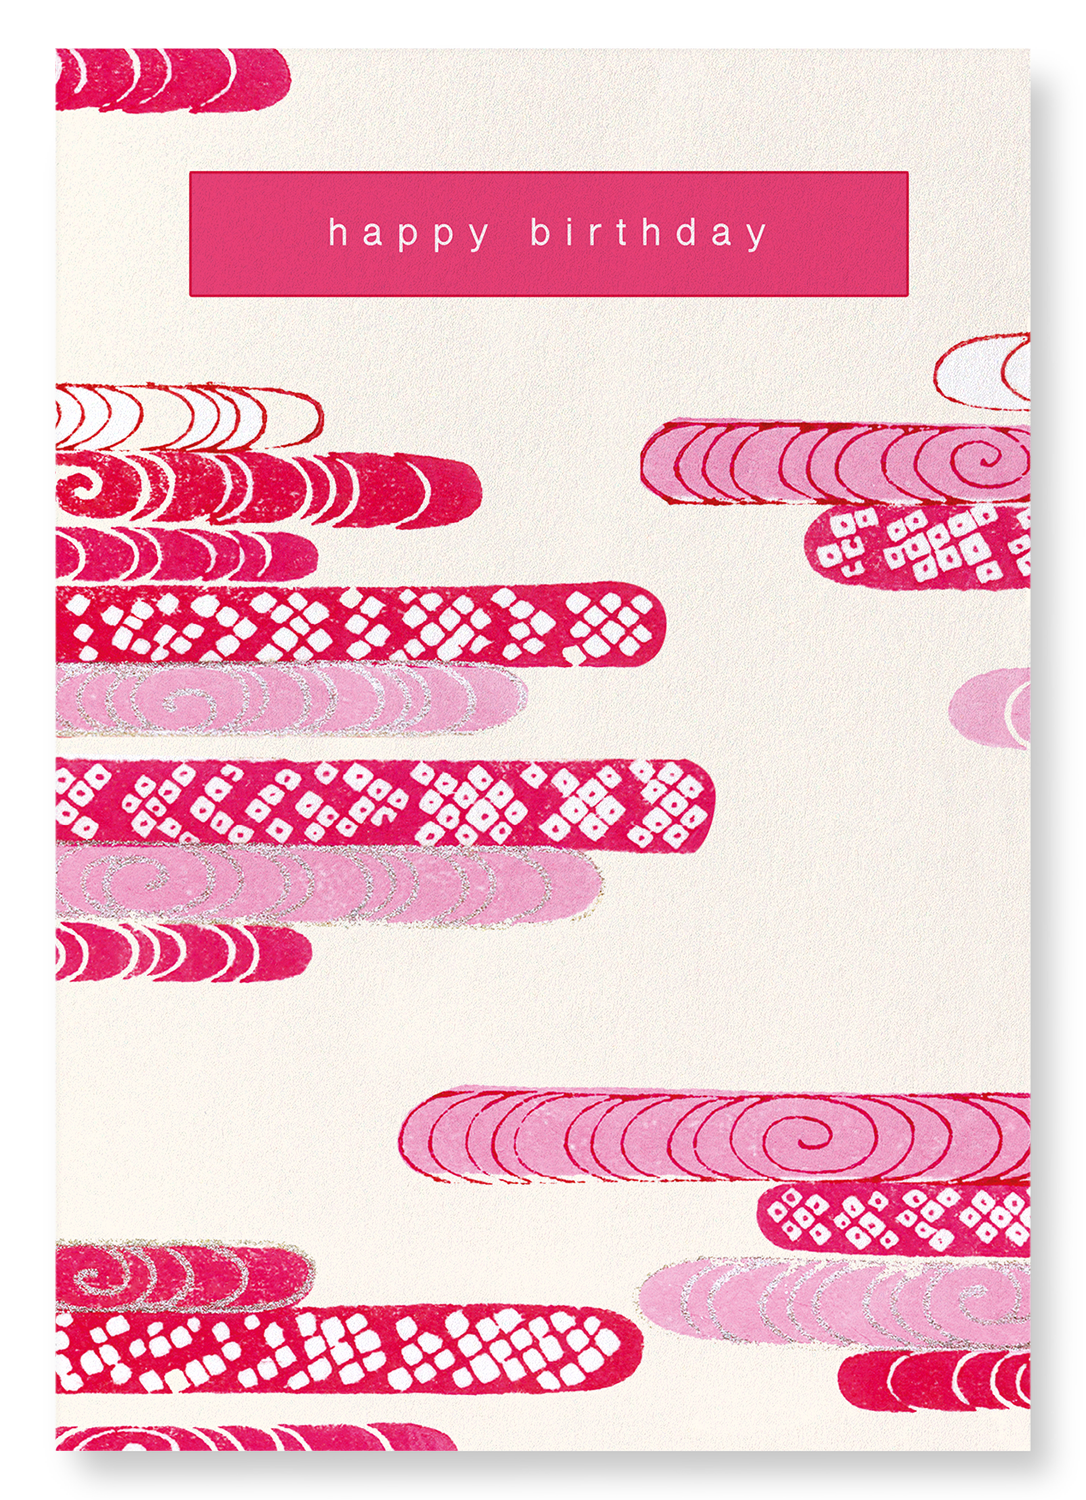 PINK WAVES OF BIRTHDAY WISHES